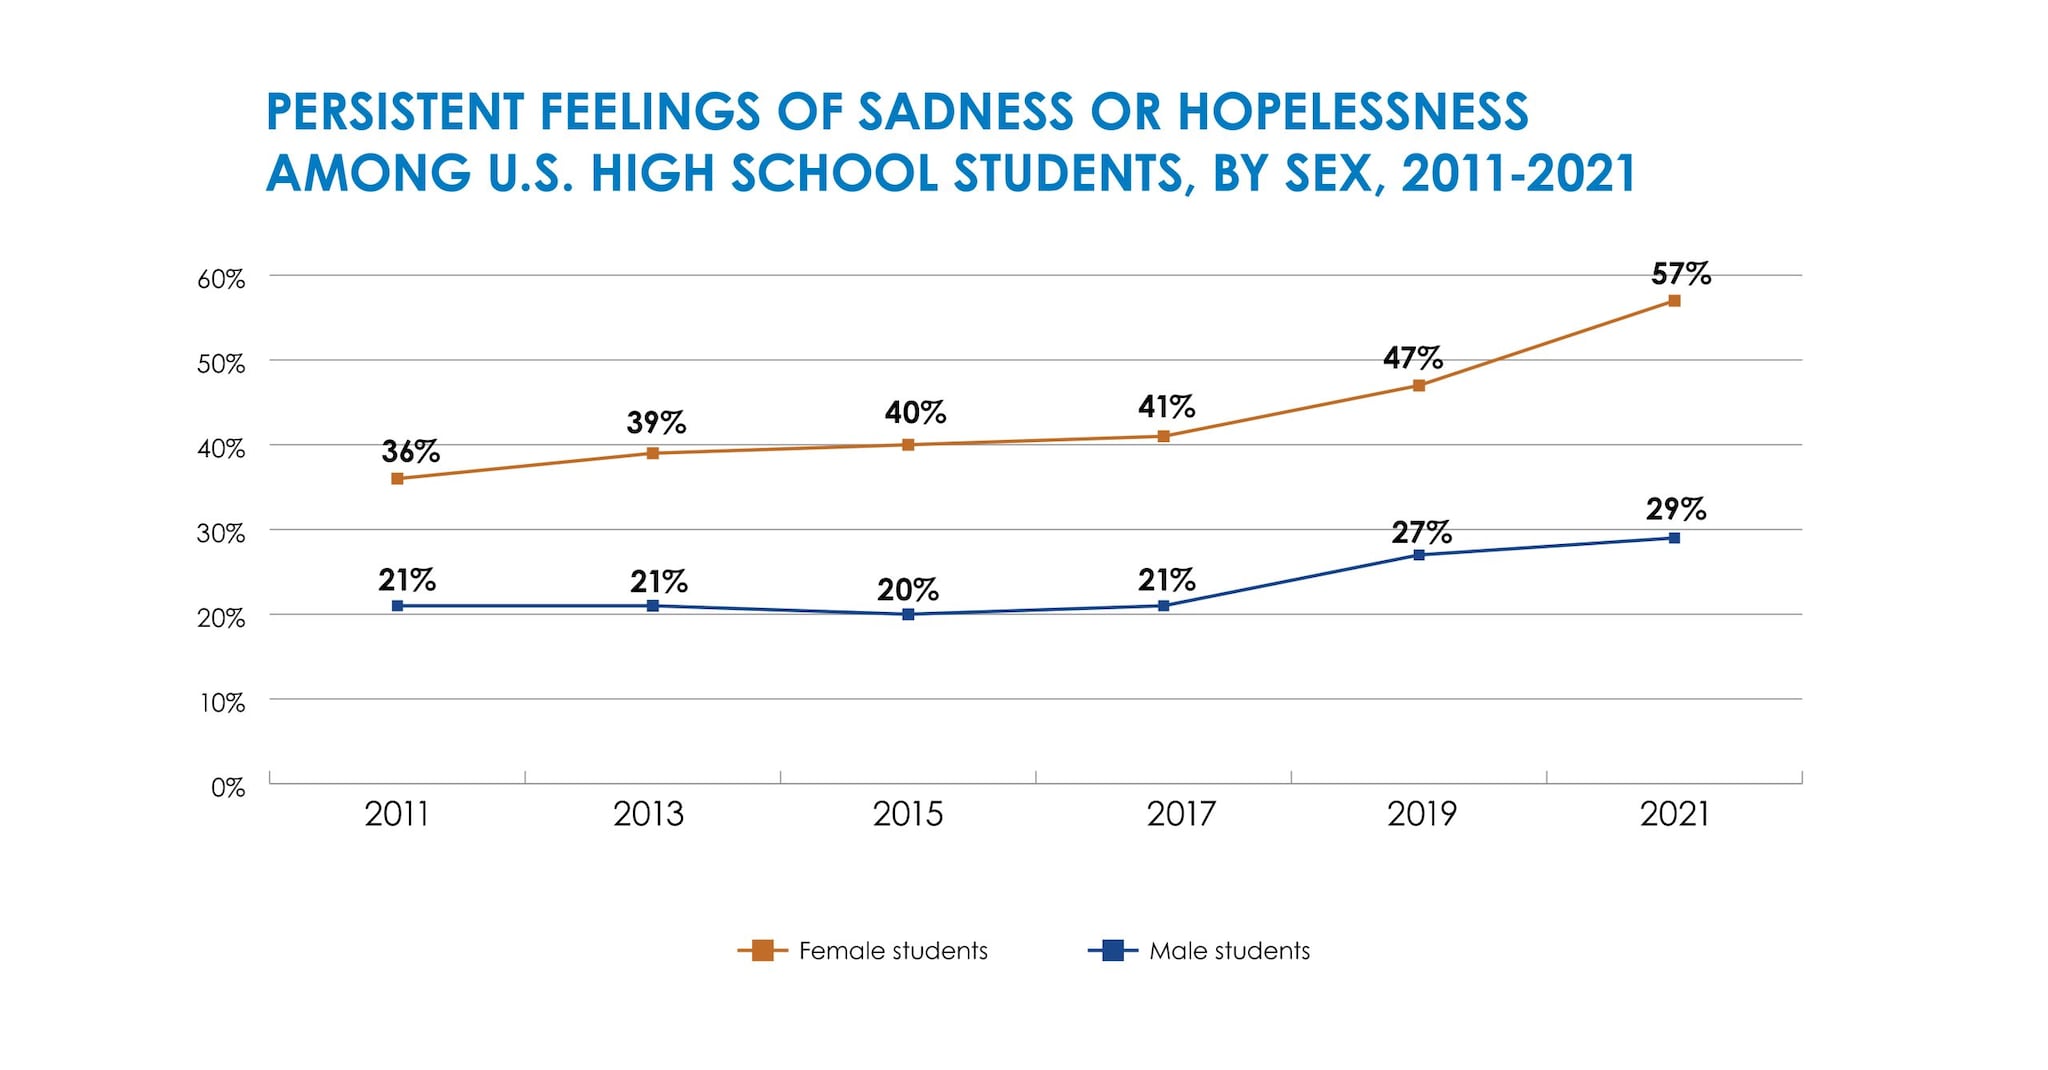 A double line graph of 2011-2021 U.S. student data on persistent feelings of sadness or hopelessness by sex, with girls reporting more such feelings compared to boys